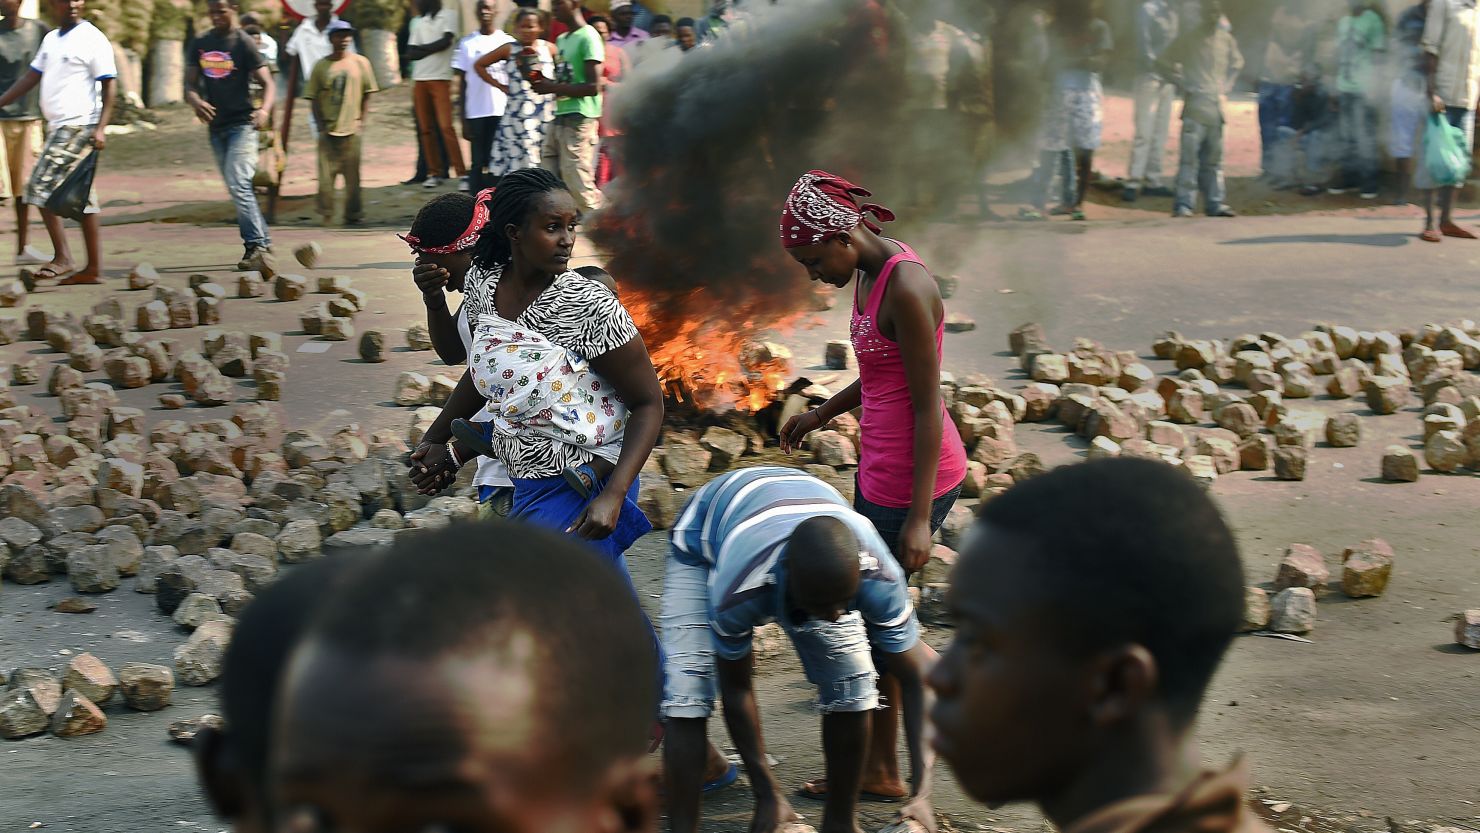 The U.N. says more than 200 people have been killed since Burundi's highly contested election in July.